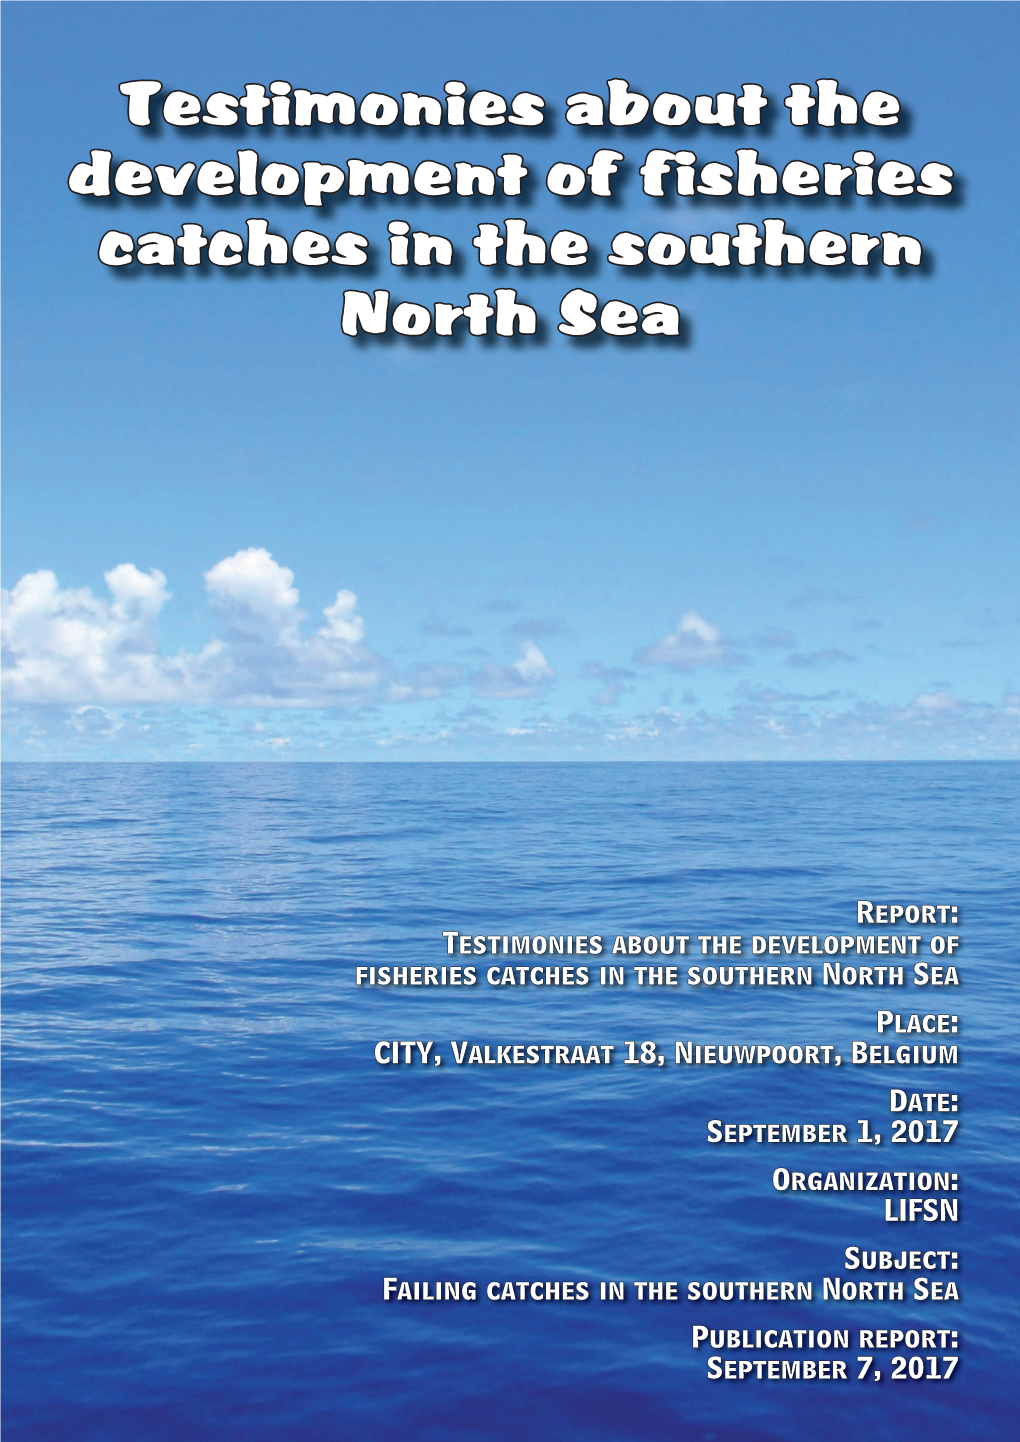 Testimonies About the Development of Fisheries Catches in the Southern North Sea